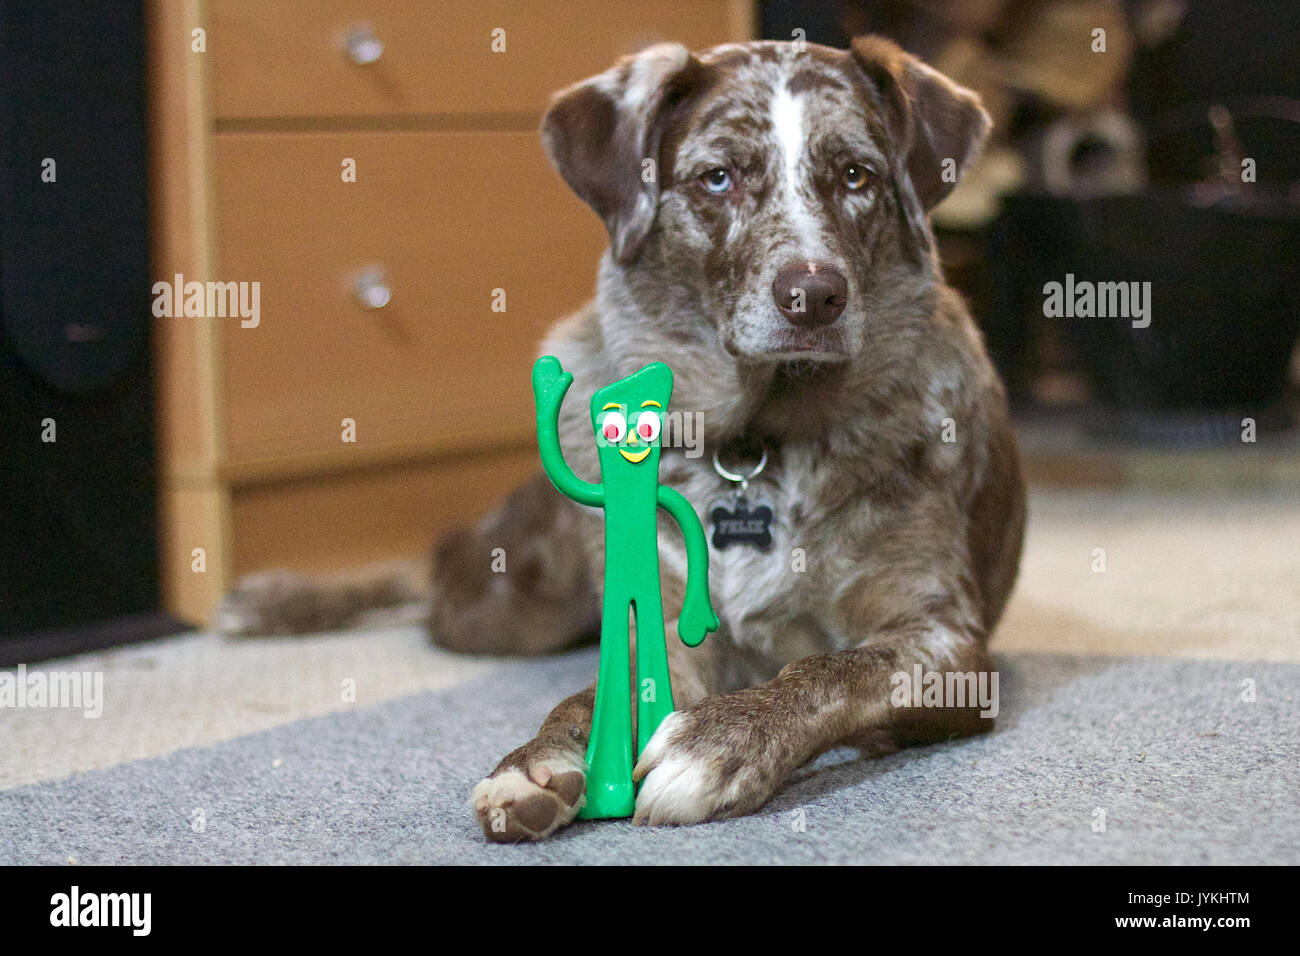 2017 365 56 Gumby IS Fun and Flexible (32276516264) Stock Photo